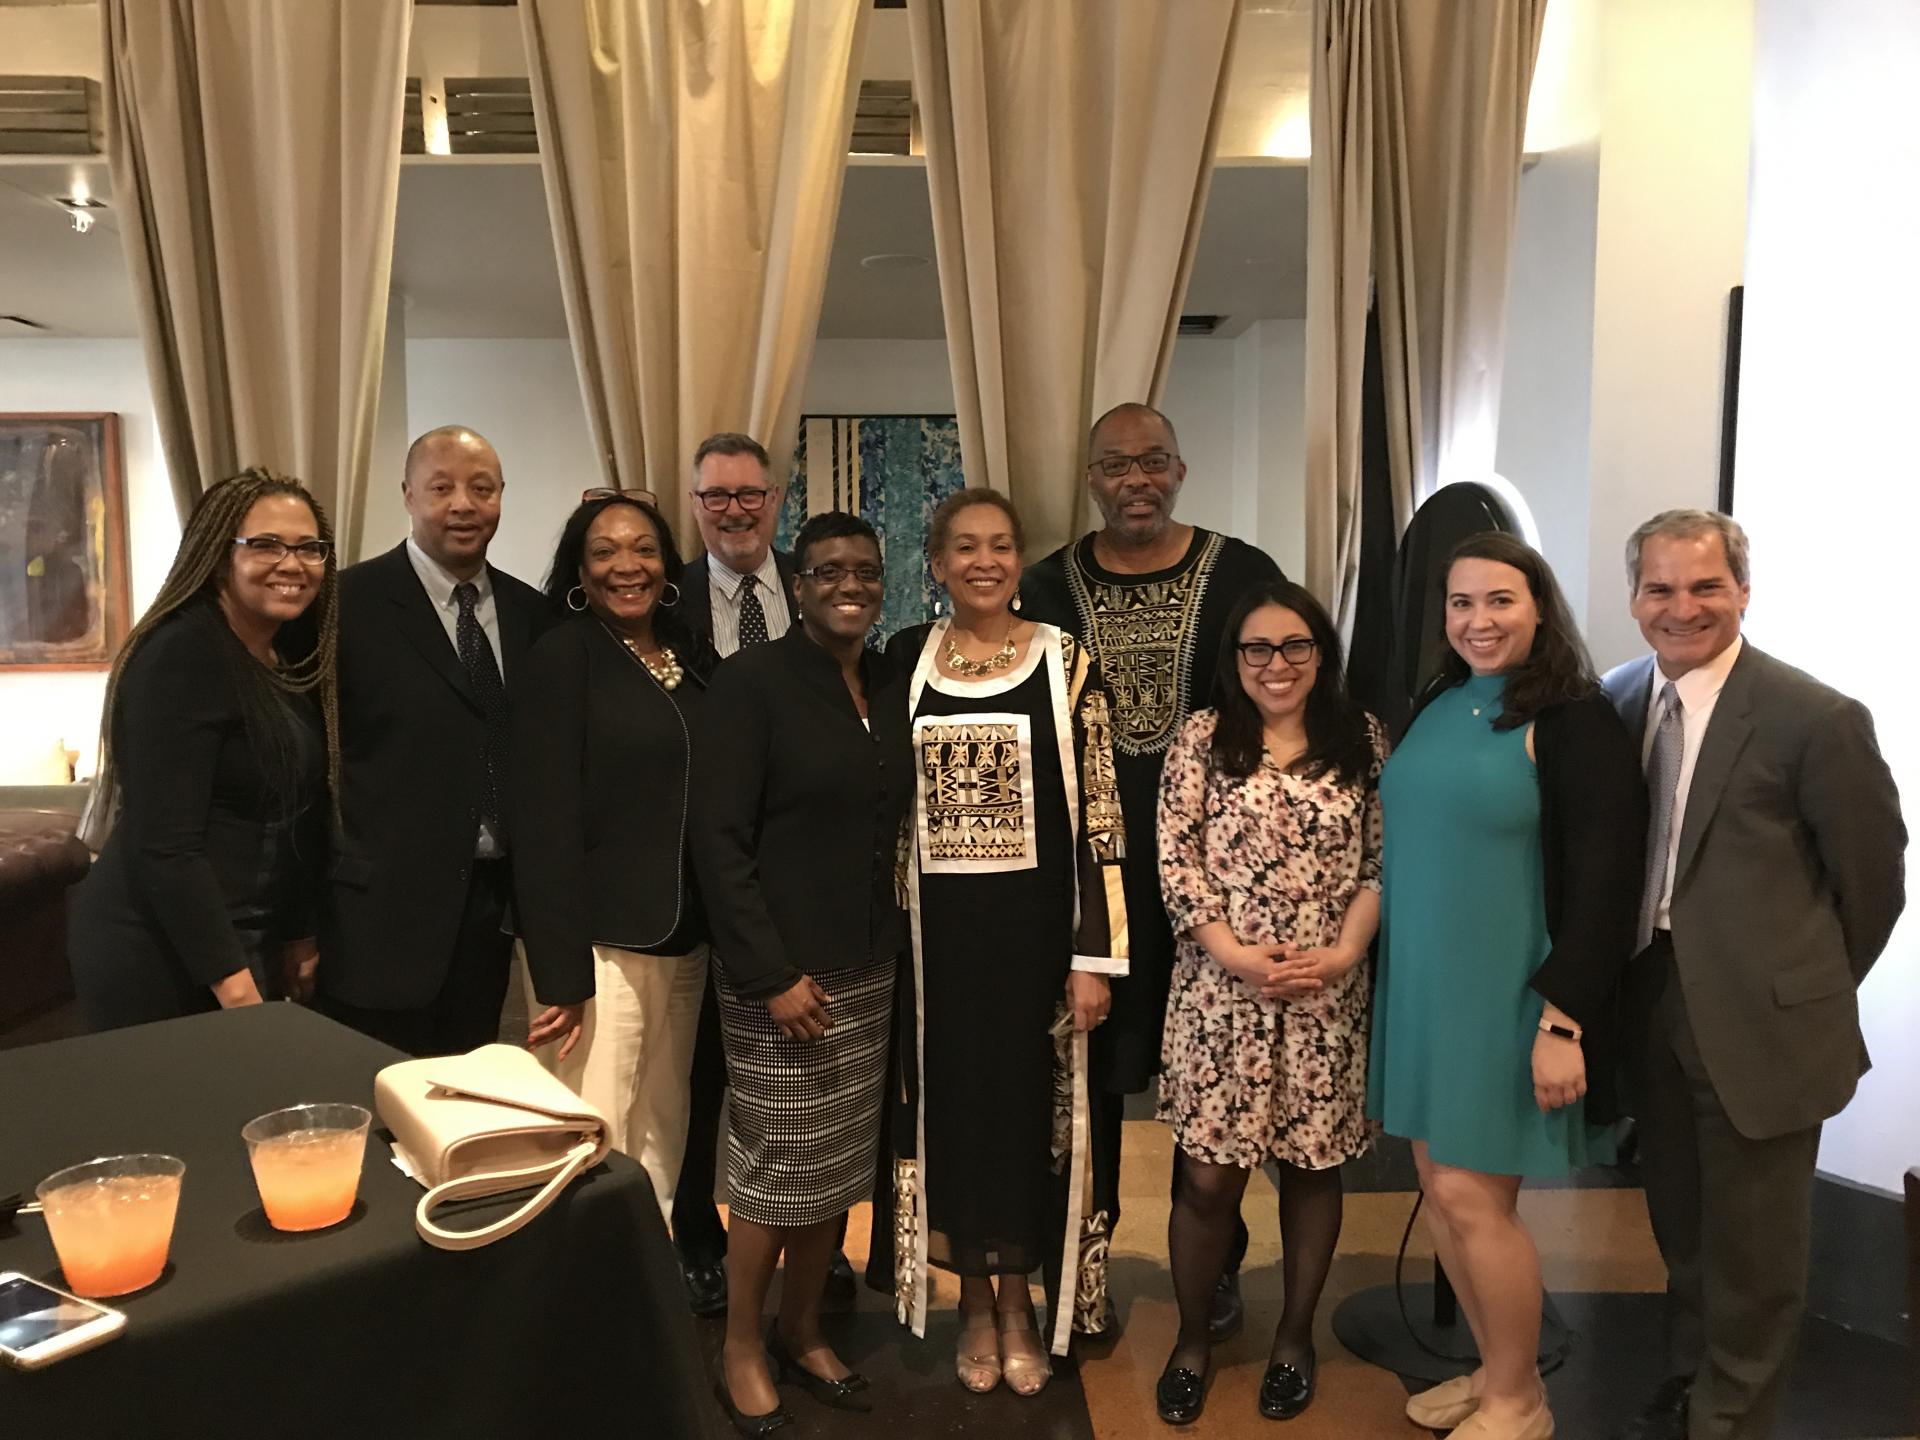 La-Verna Fountain, Vice President for Strategic Communications and Construction Business Initiatives, next to her husband James and surrounded by colleagues when she received the Harlem Business Alliance "Woman of Action" award at a ceremony on May 3, 2017.